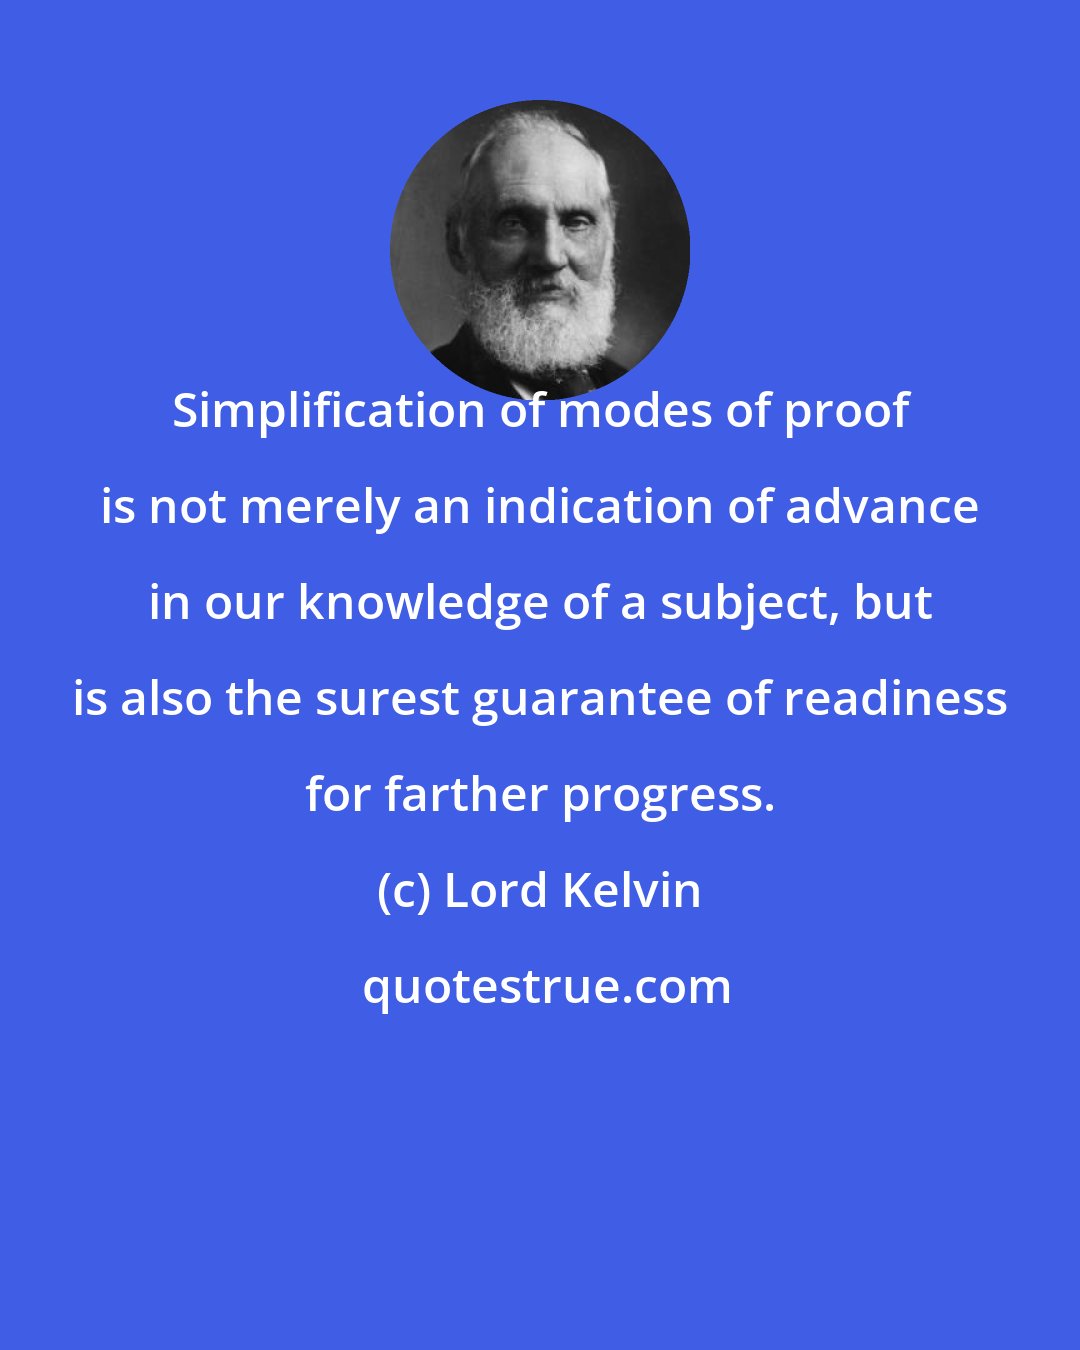 Lord Kelvin: Simplification of modes of proof is not merely an indication of advance in our knowledge of a subject, but is also the surest guarantee of readiness for farther progress.